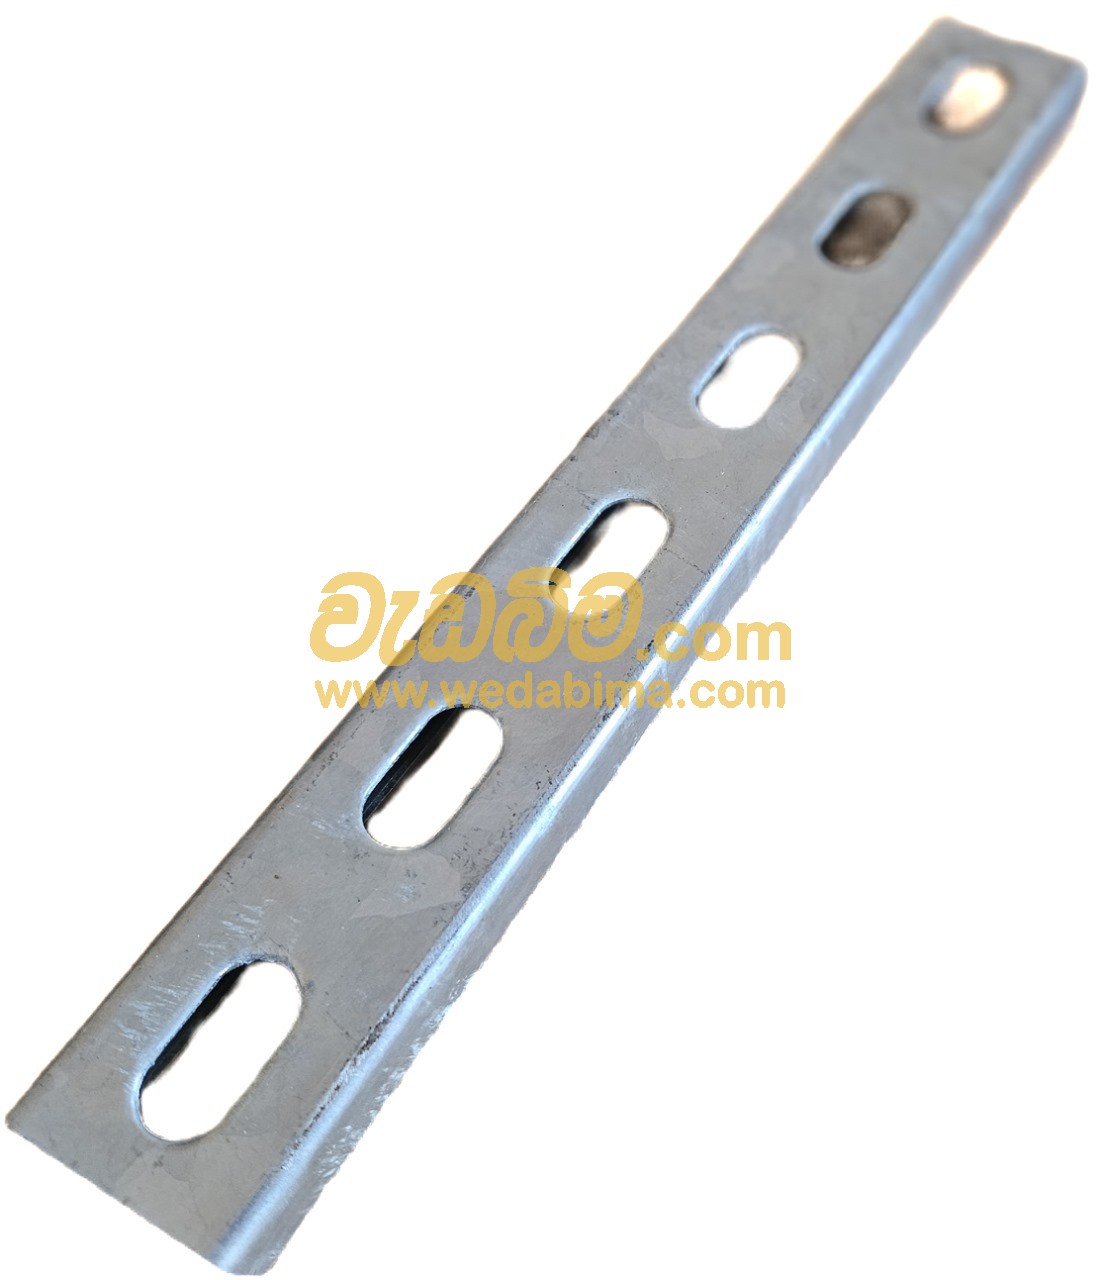 Stainless Steel Slotted Channel Price in Sri Lanka